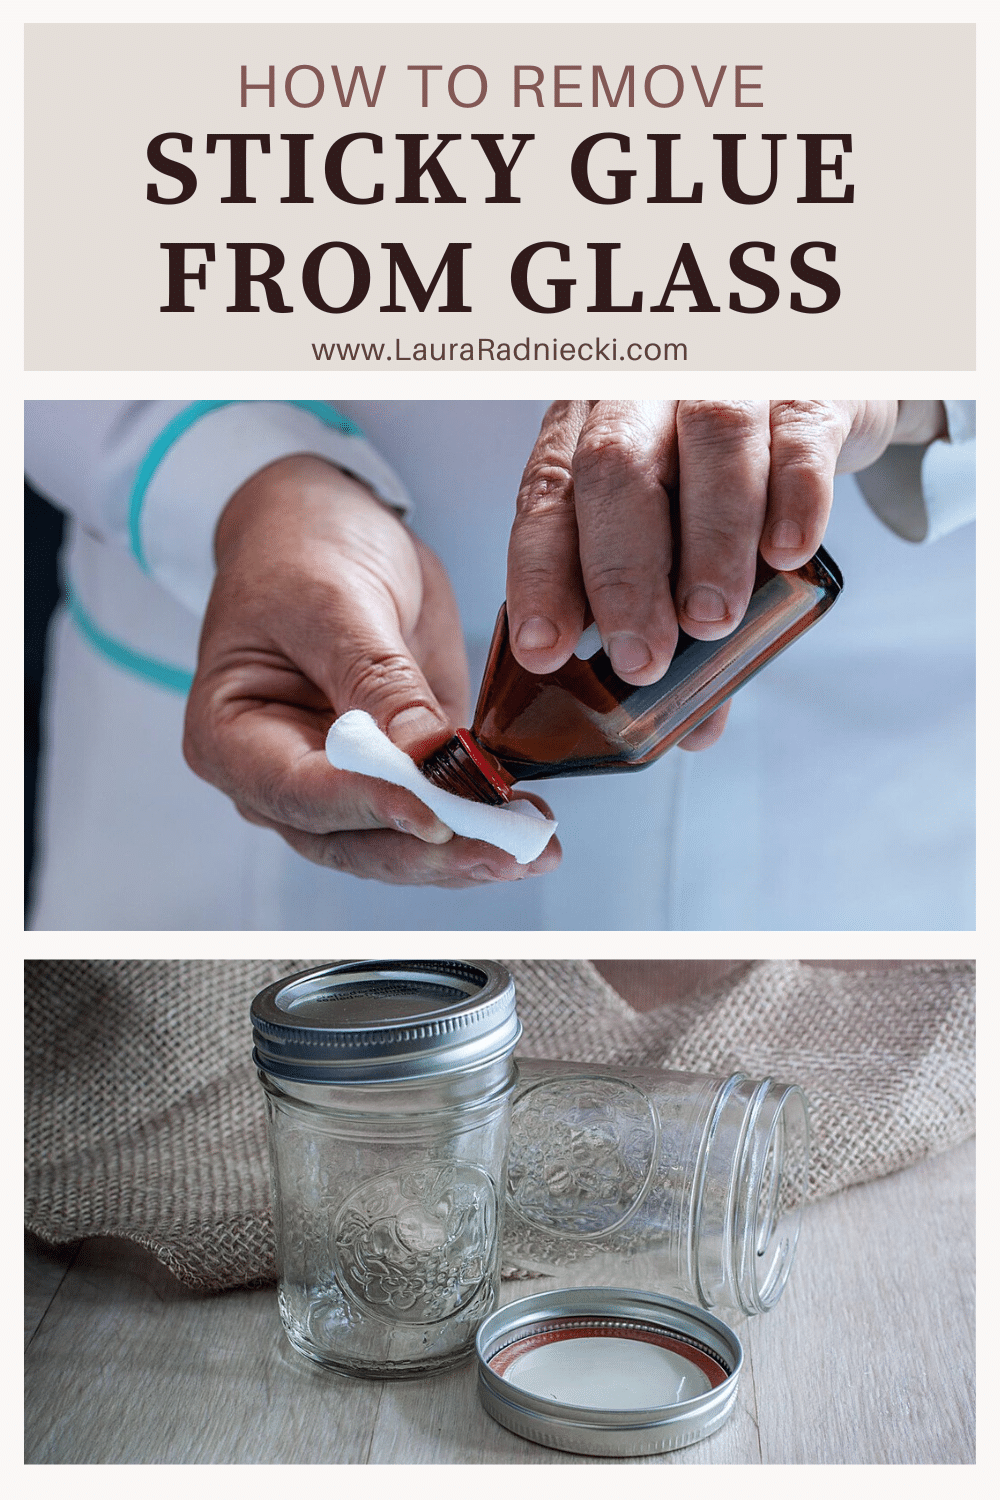 How to get Sticky Residue Off Wood, Glass, and Plastic